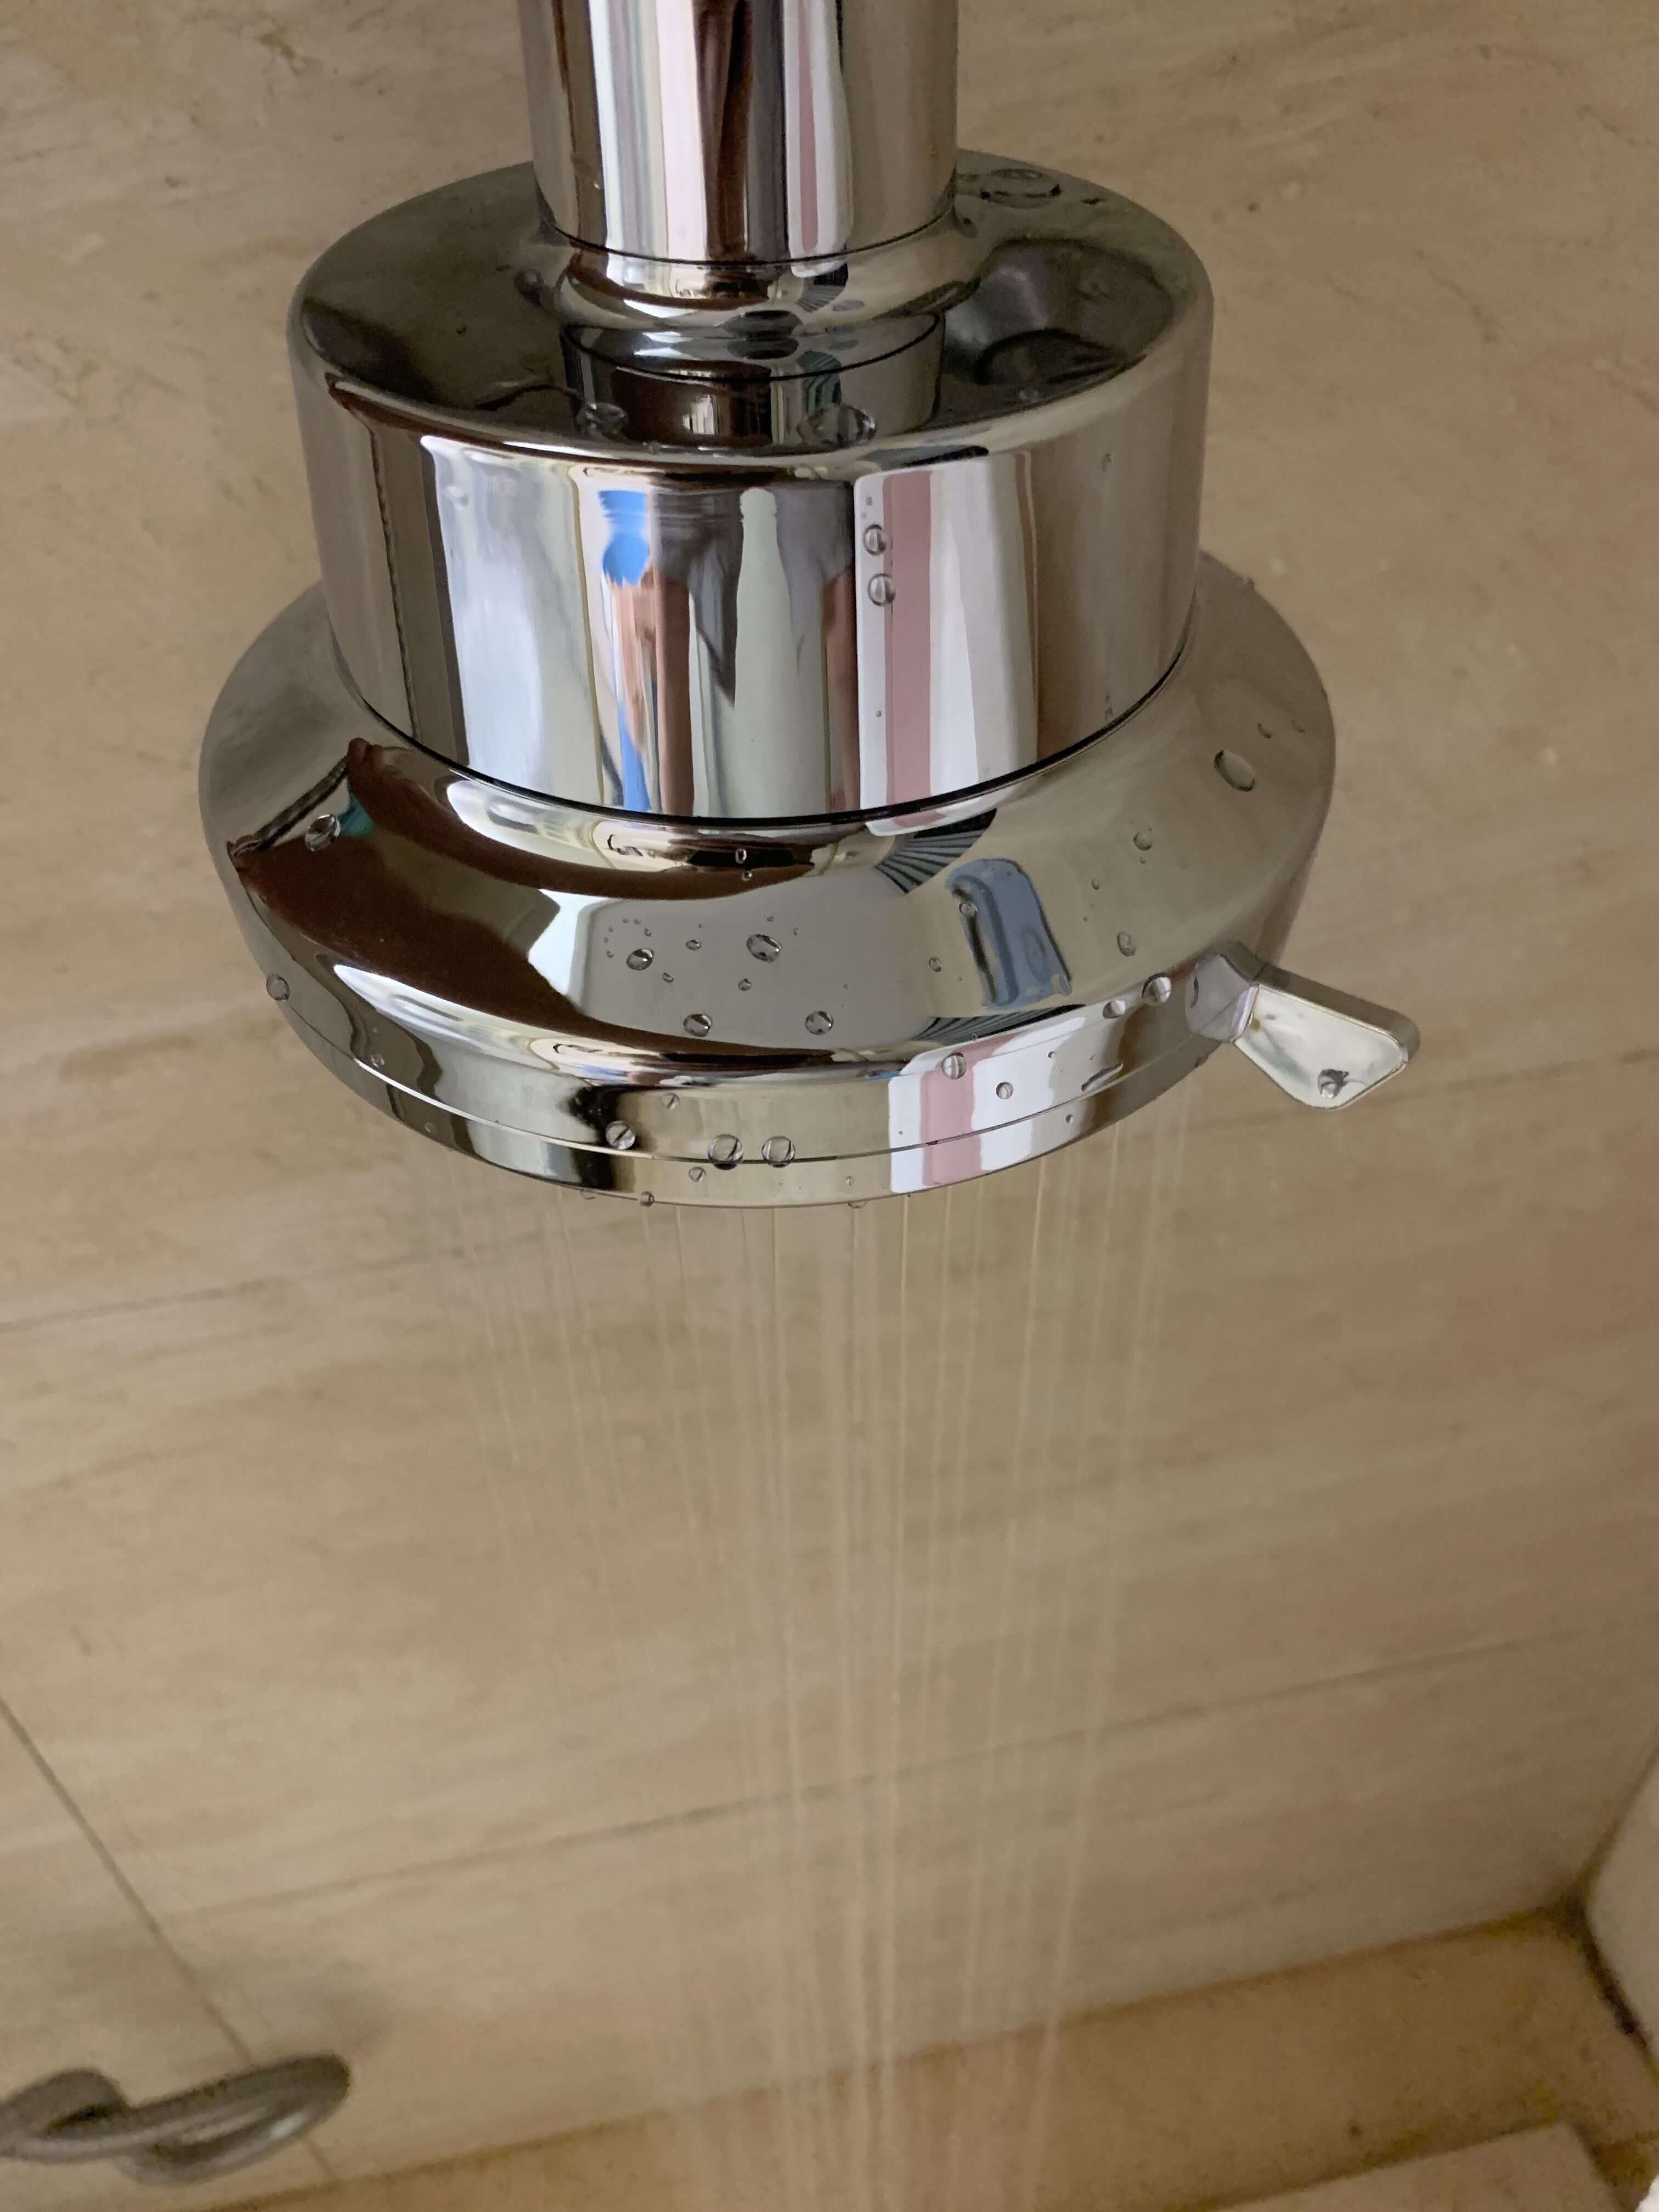 Shower Head With Filter for Hard Water